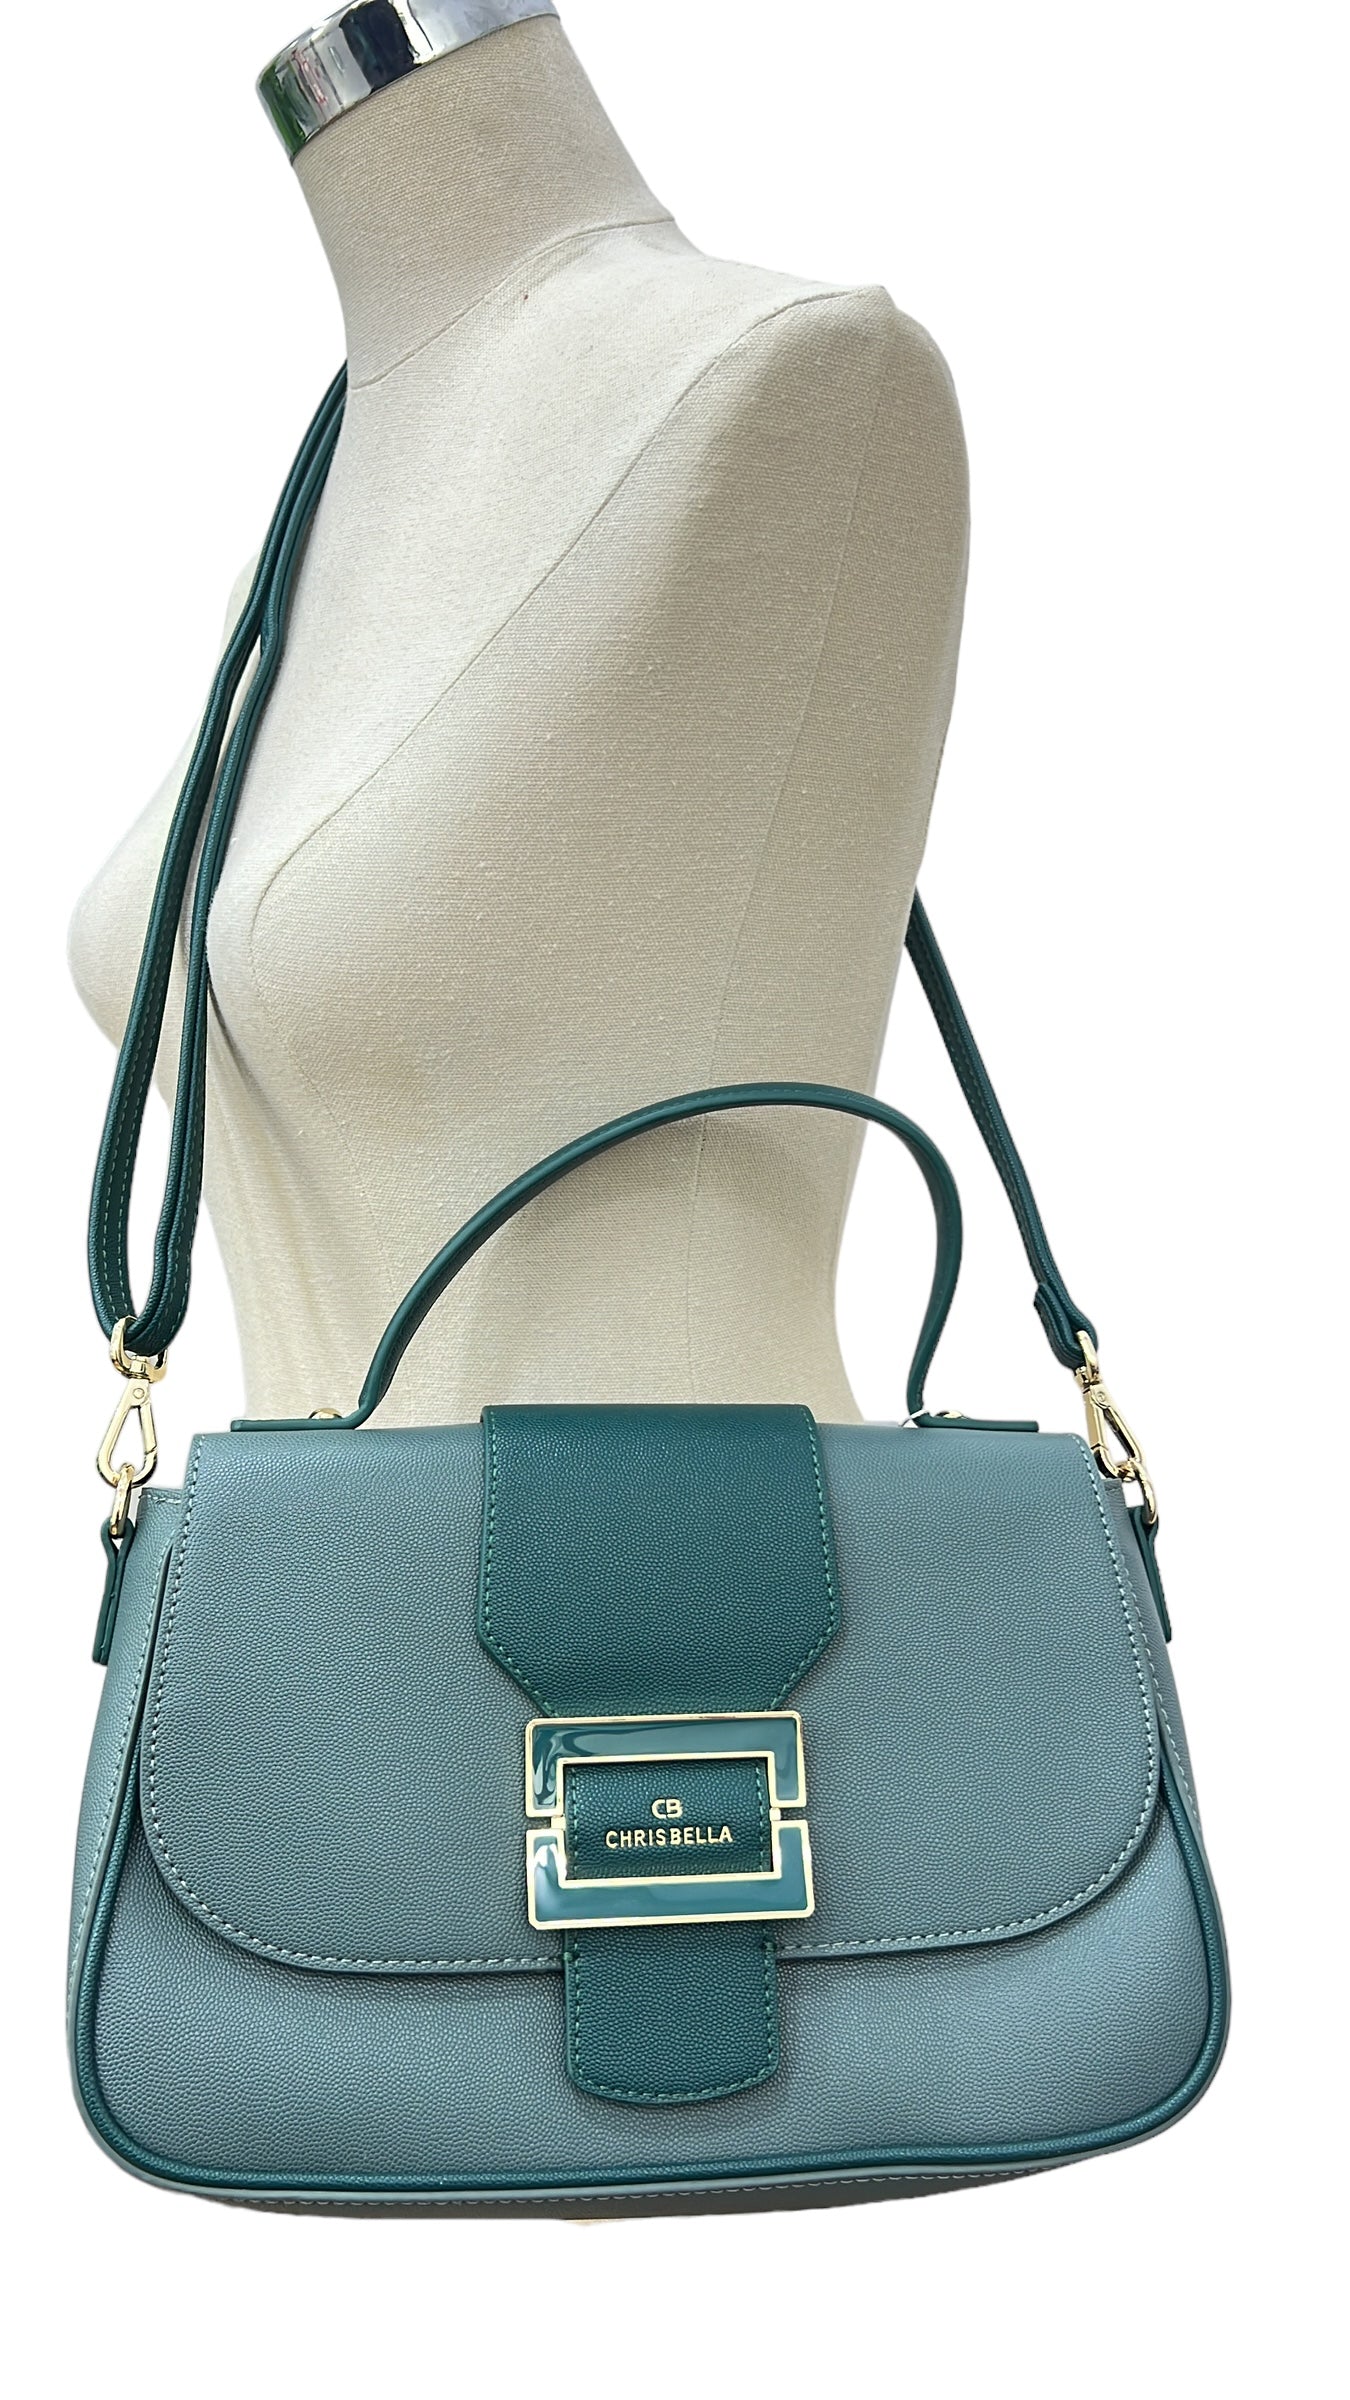 CHRISBELLA TEXTURED BUCKLE DETAIL TWO-TONE BAG IN GREEN